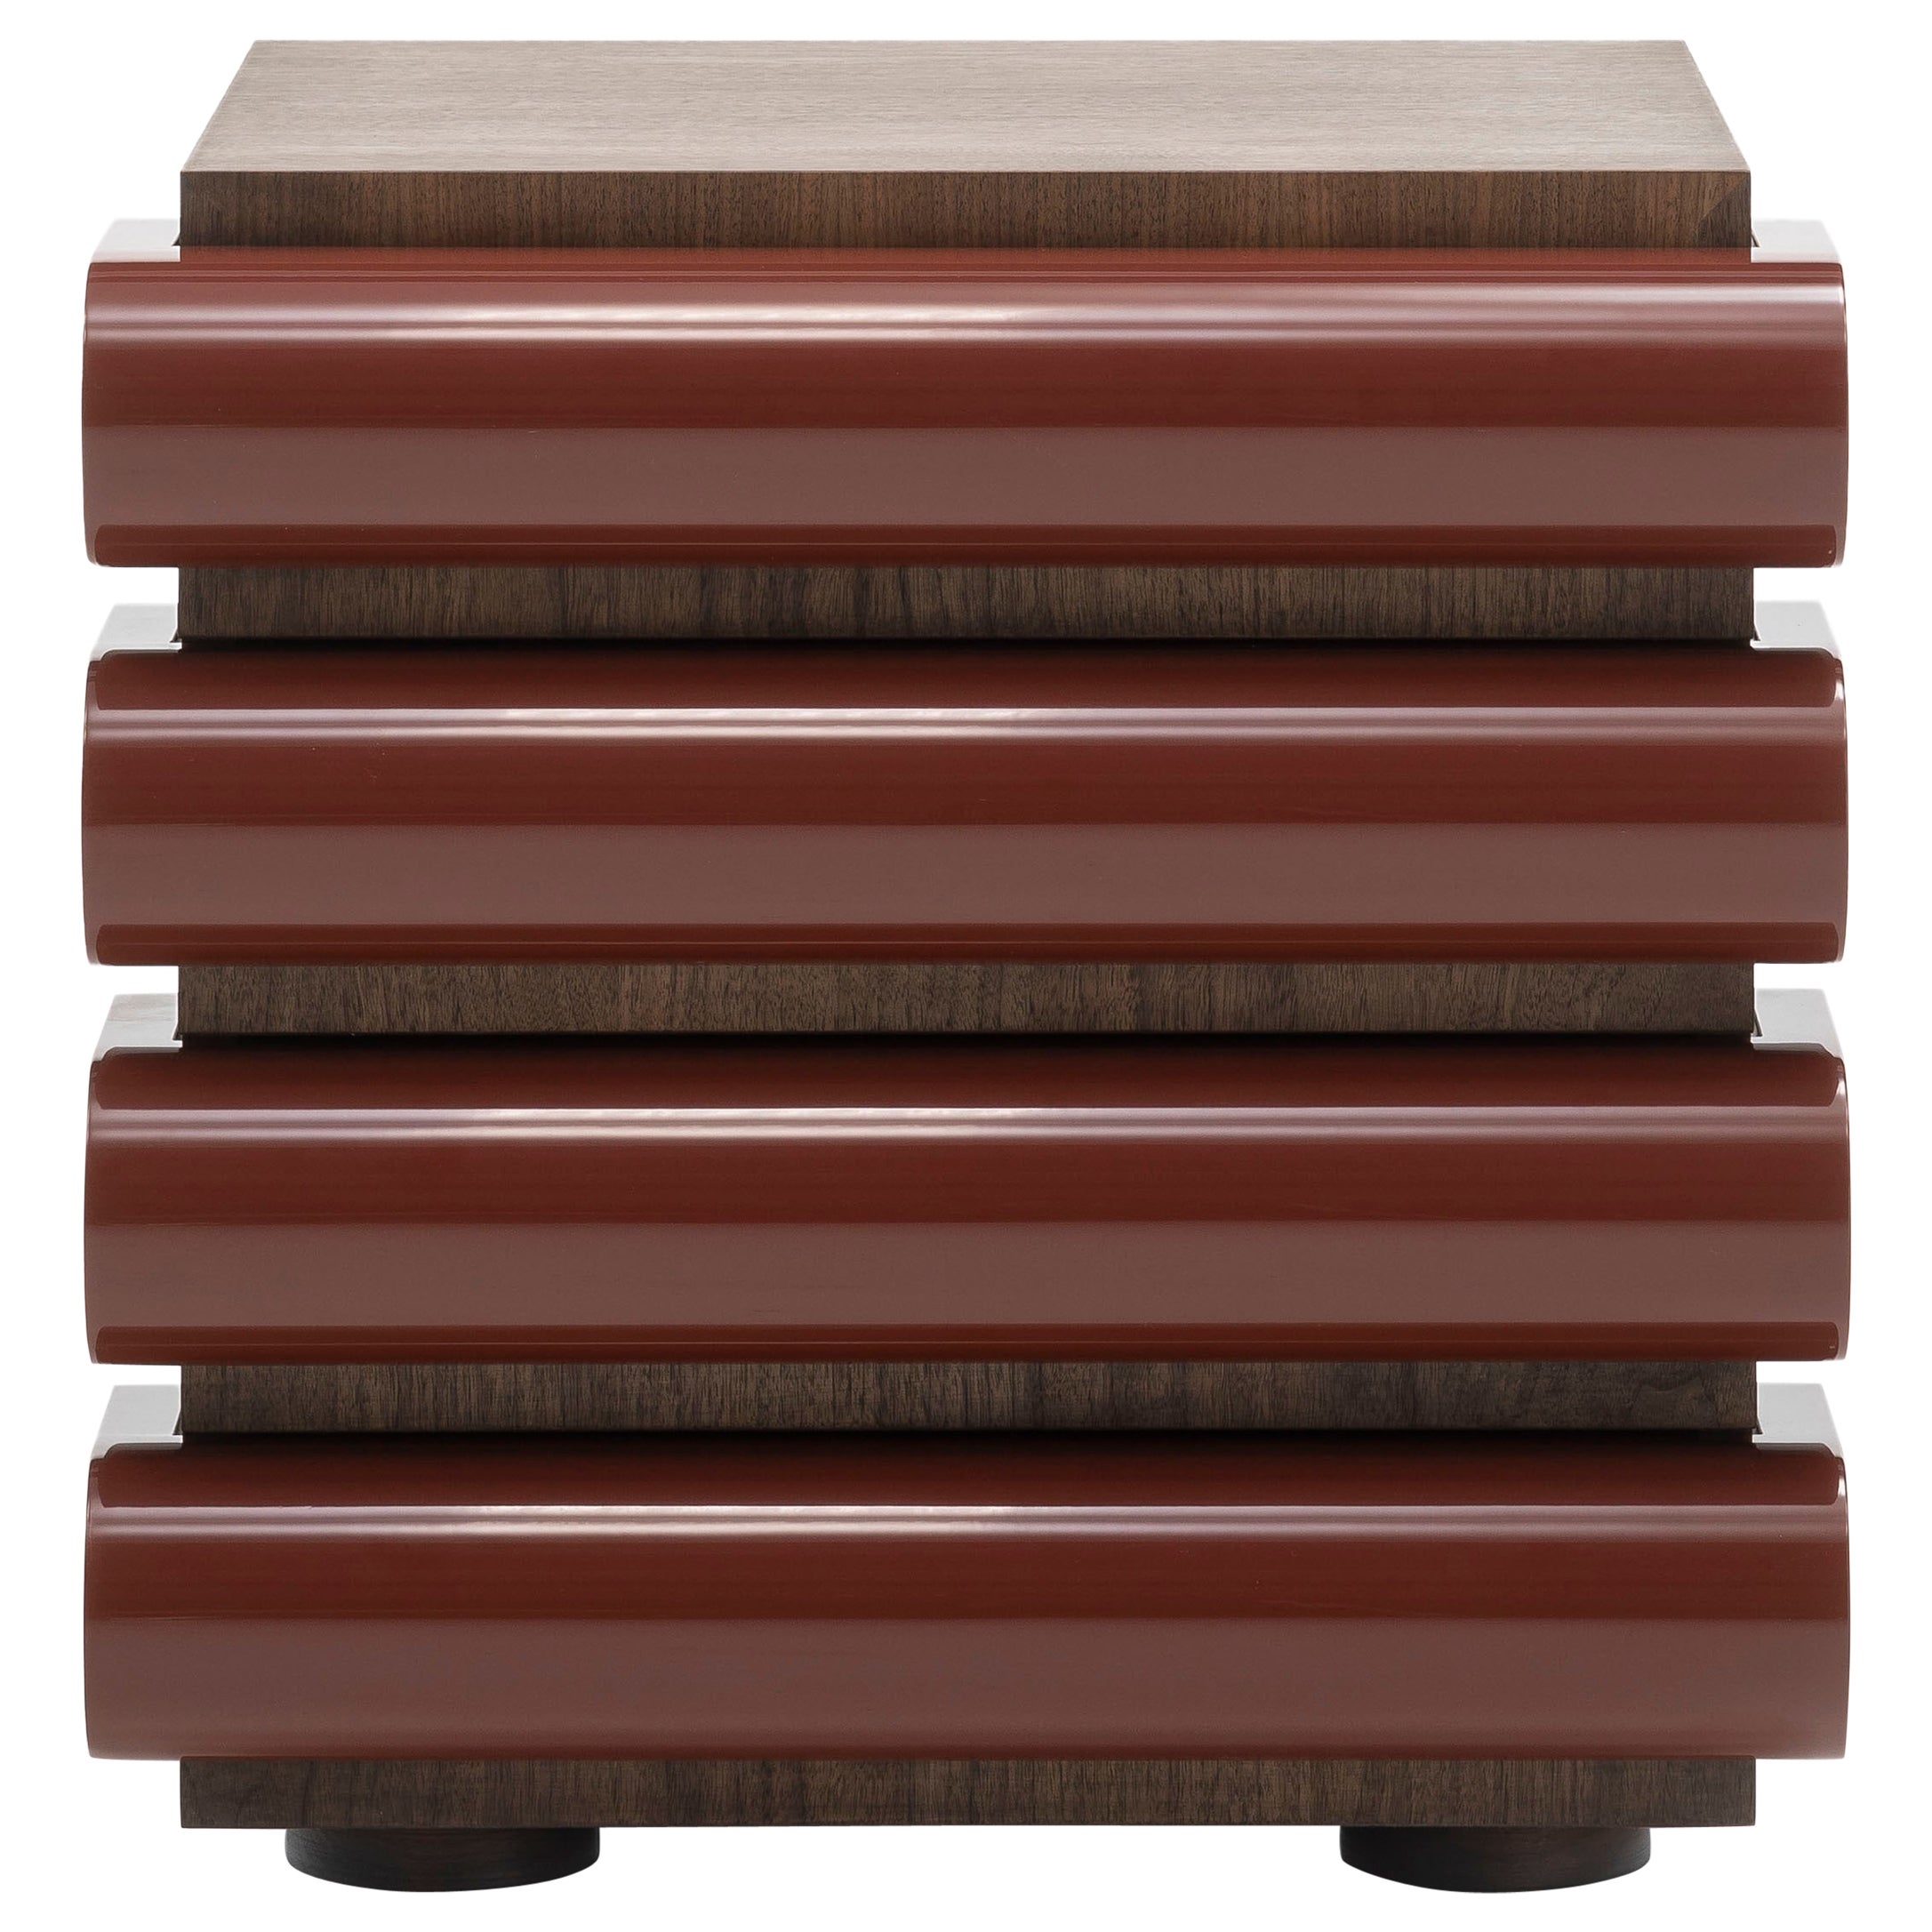 Acerbis Storet Drawers Cabinet in Dark Stained Walnut with Brick Red Lacquered